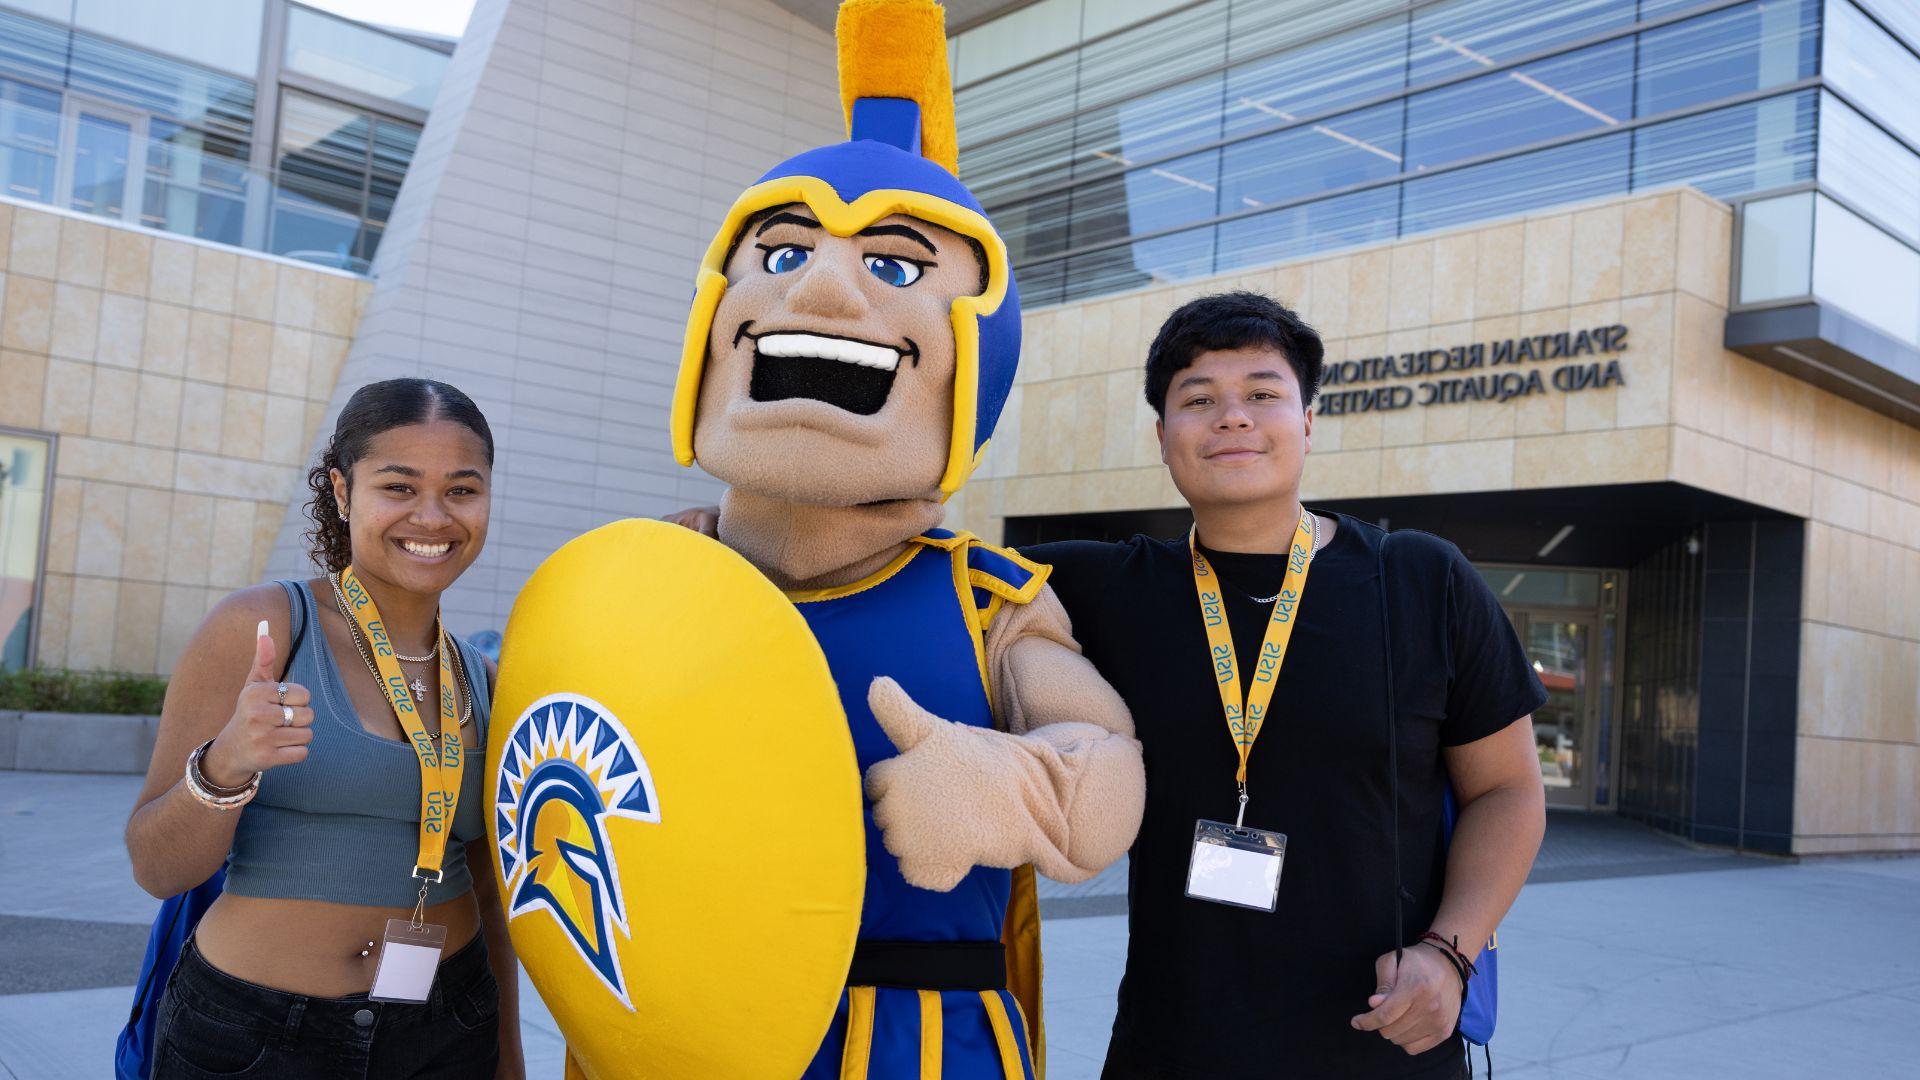 Sammy welcomes new 利记 students to frosh orientation.